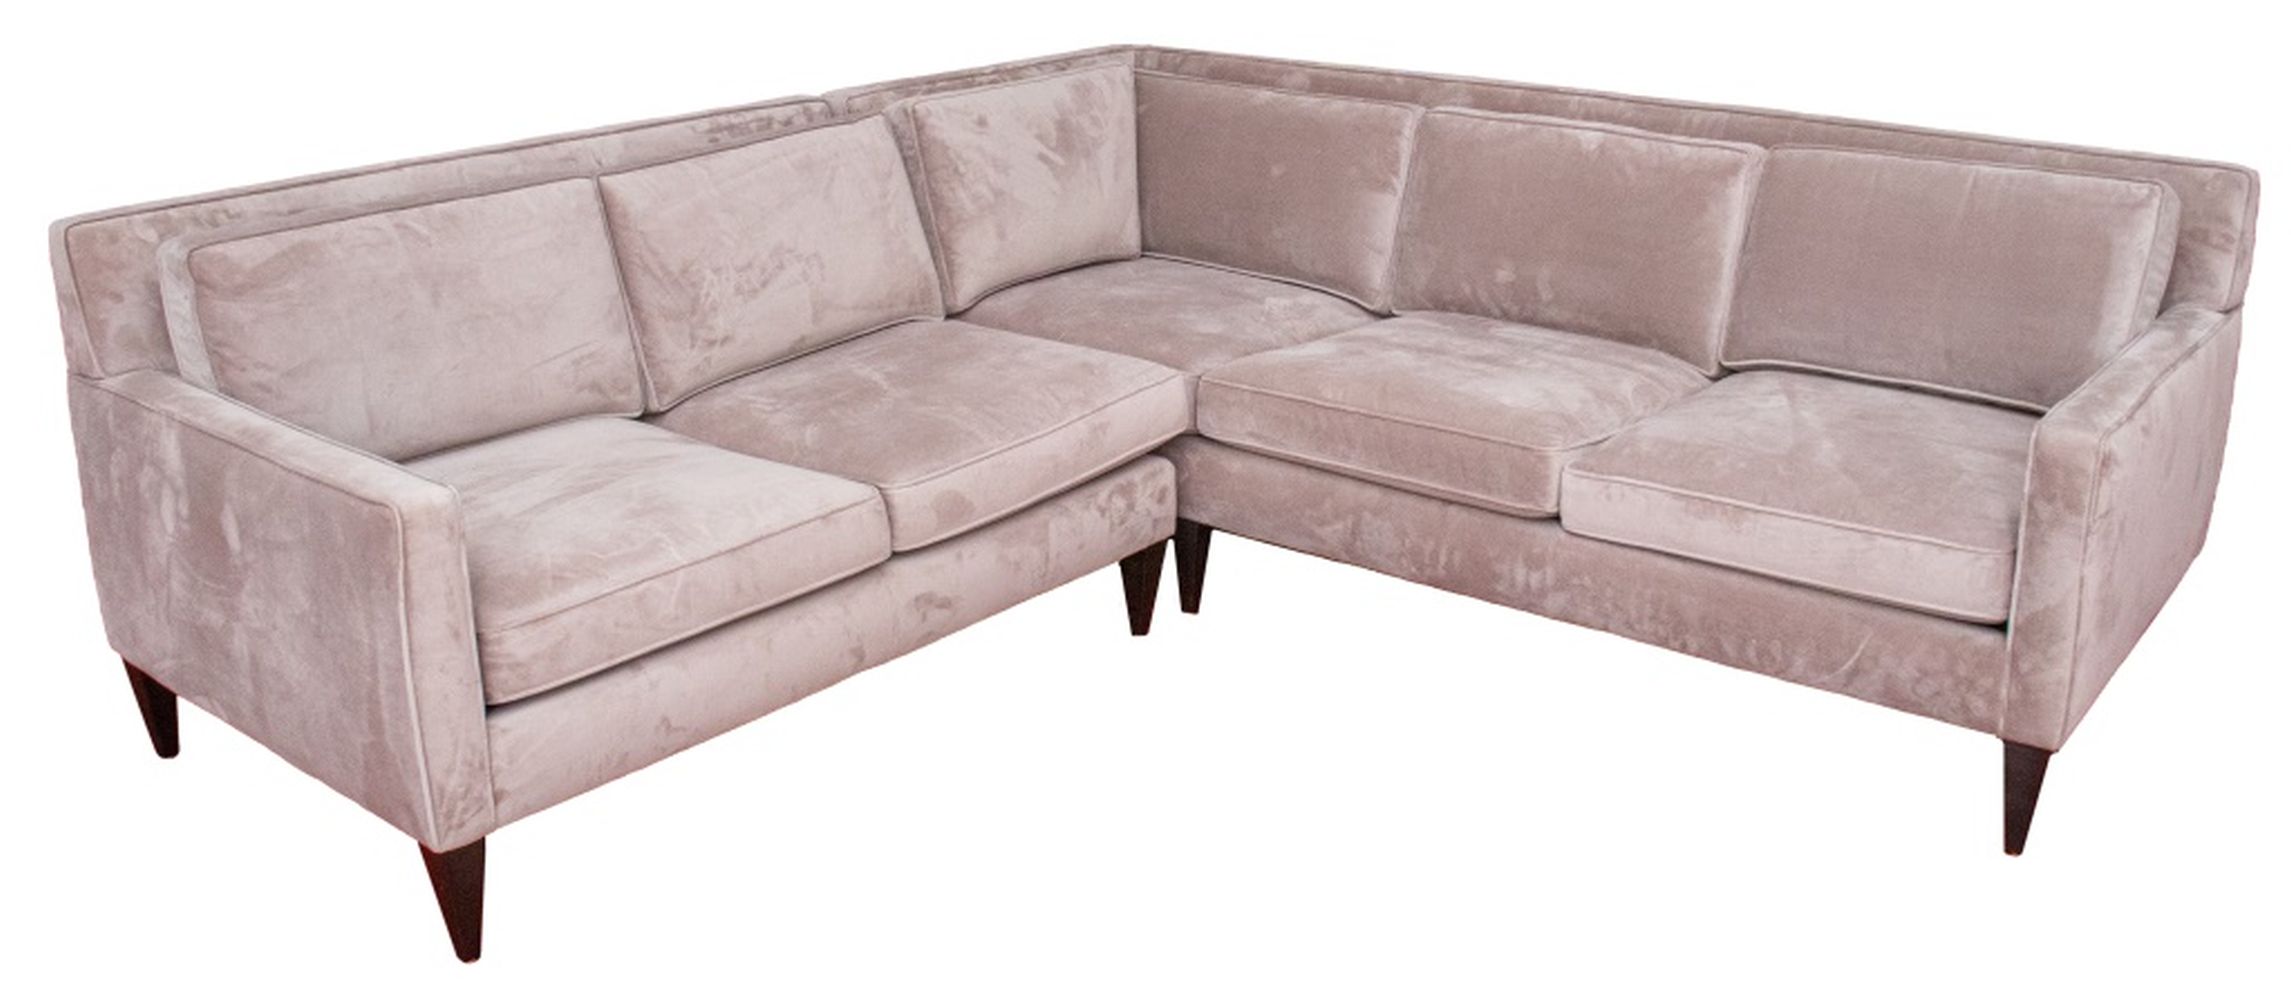 MODERN OYSTER GRAY VELOURS SECTIONAL 2bc308